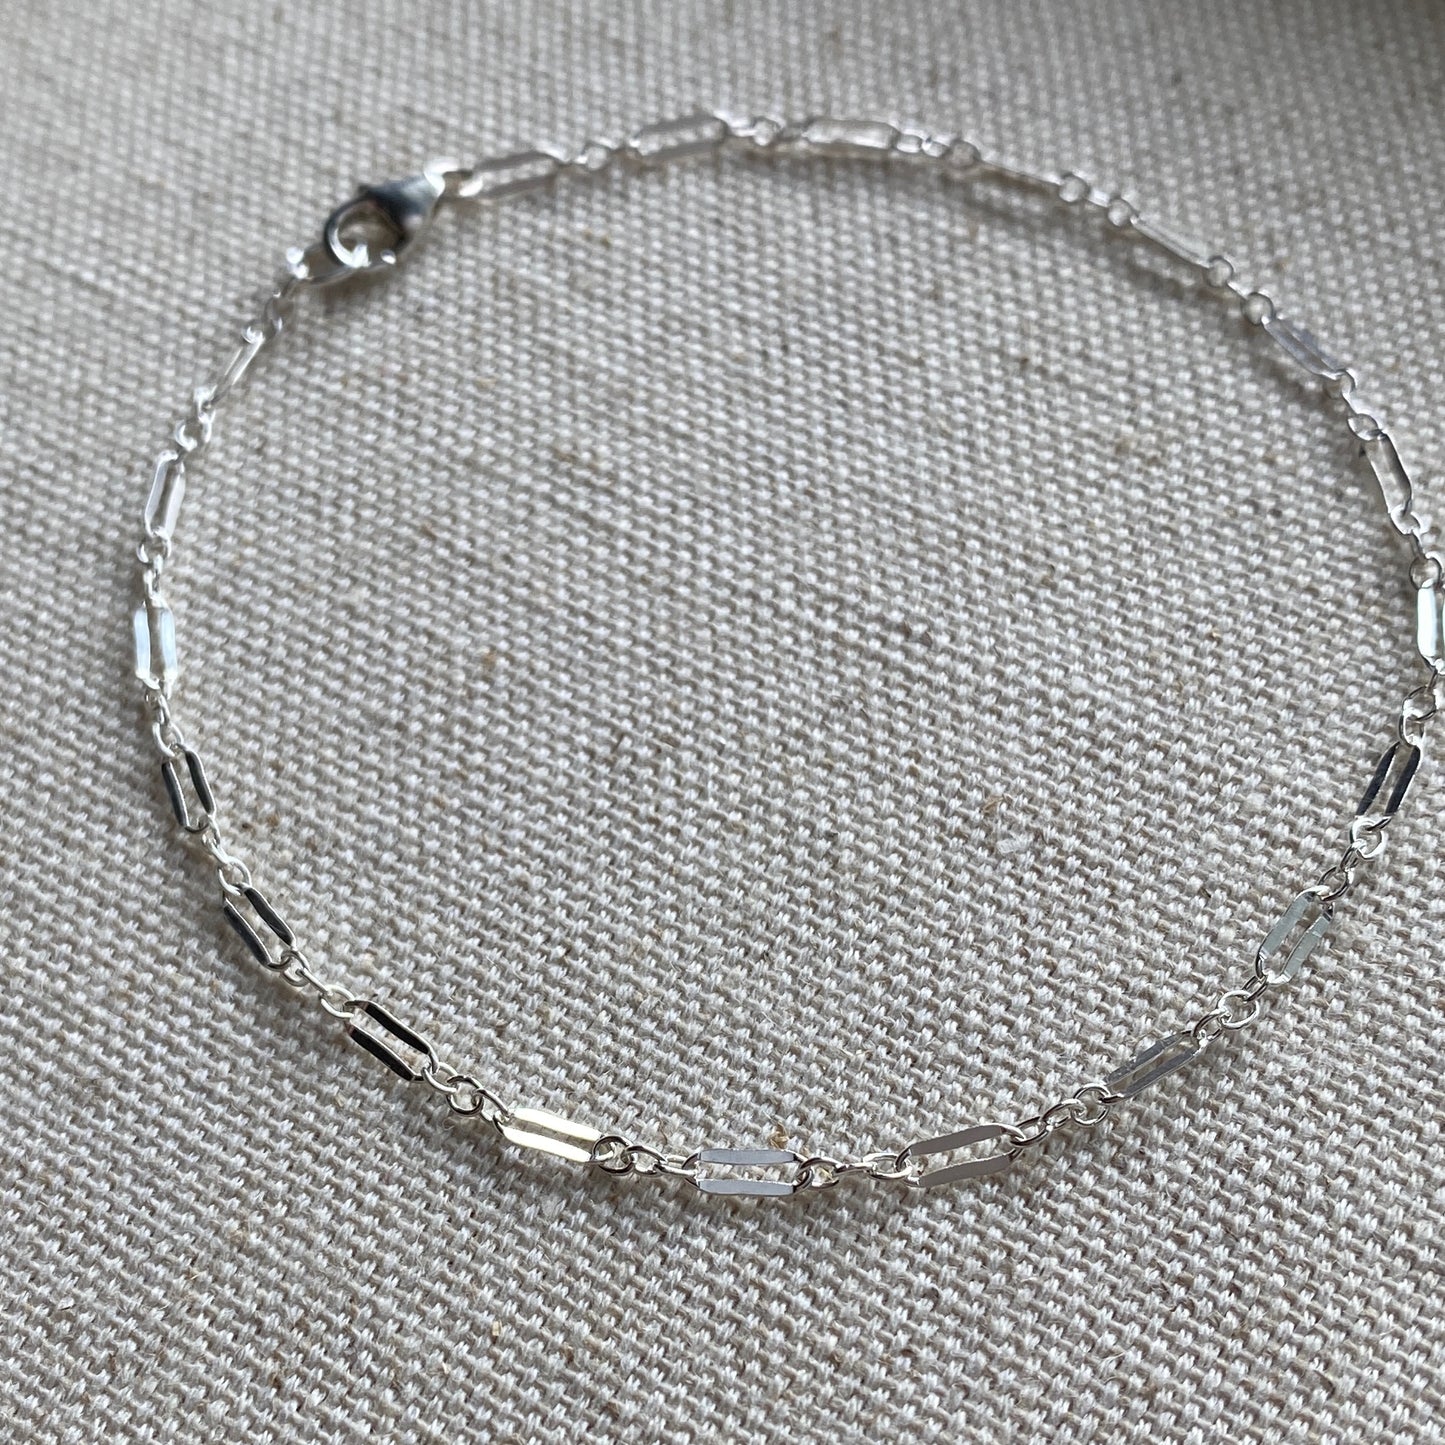 Sparkly Sequin Chain Bracelet Dainty Sterling Silver